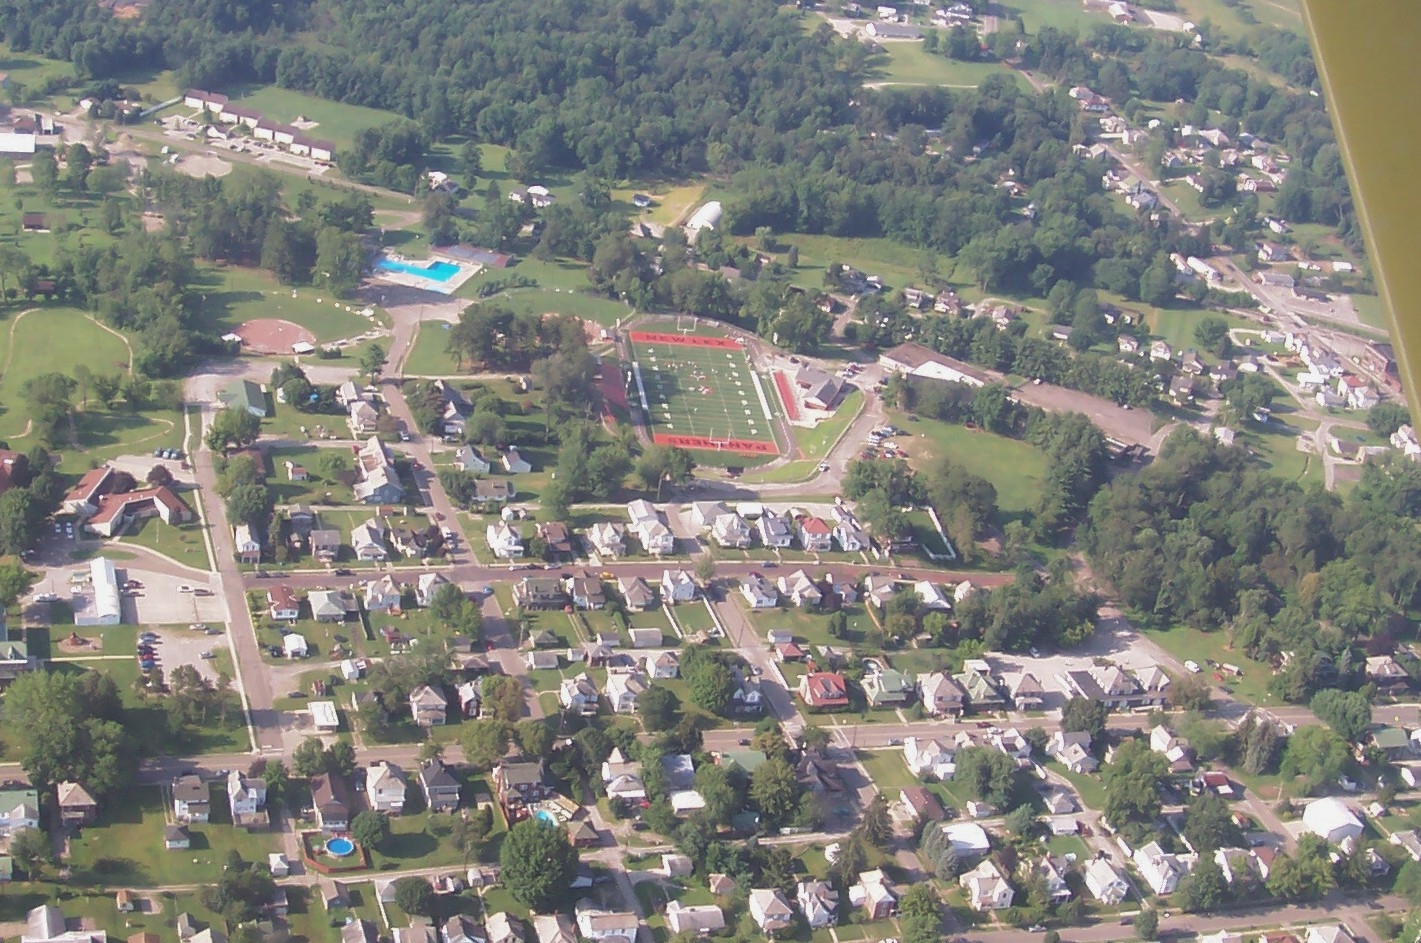 This photo of the football stadium was taken by Mr. Yuchasz August 4, 2008 while flying out of Perry